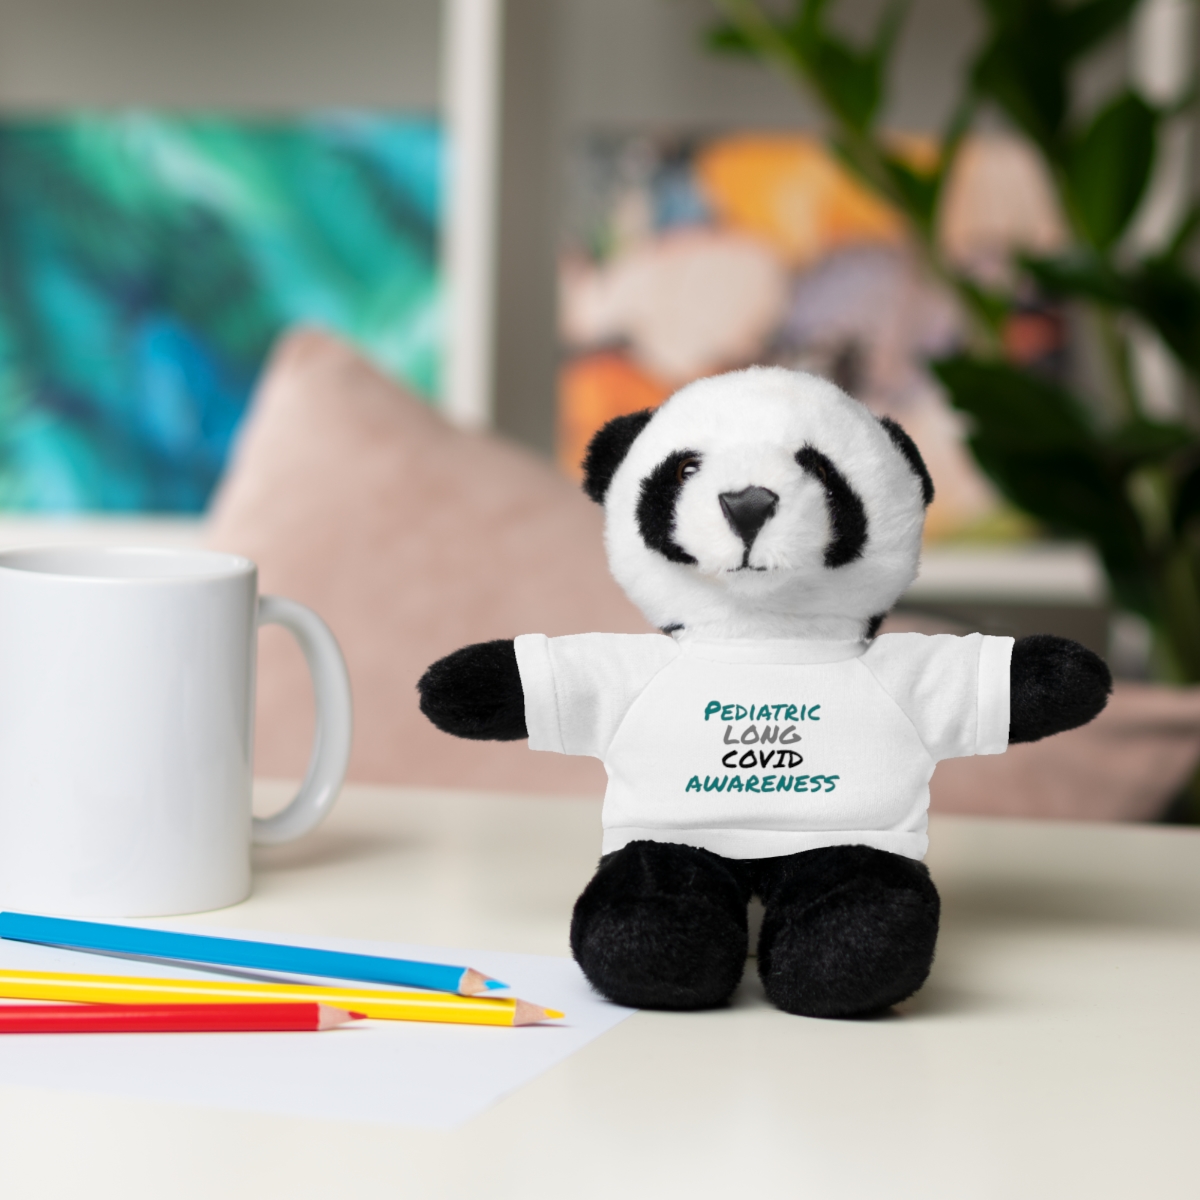 Pediatric Lond COVID Awareness Stuffed Animals with Tee product thumbnail image